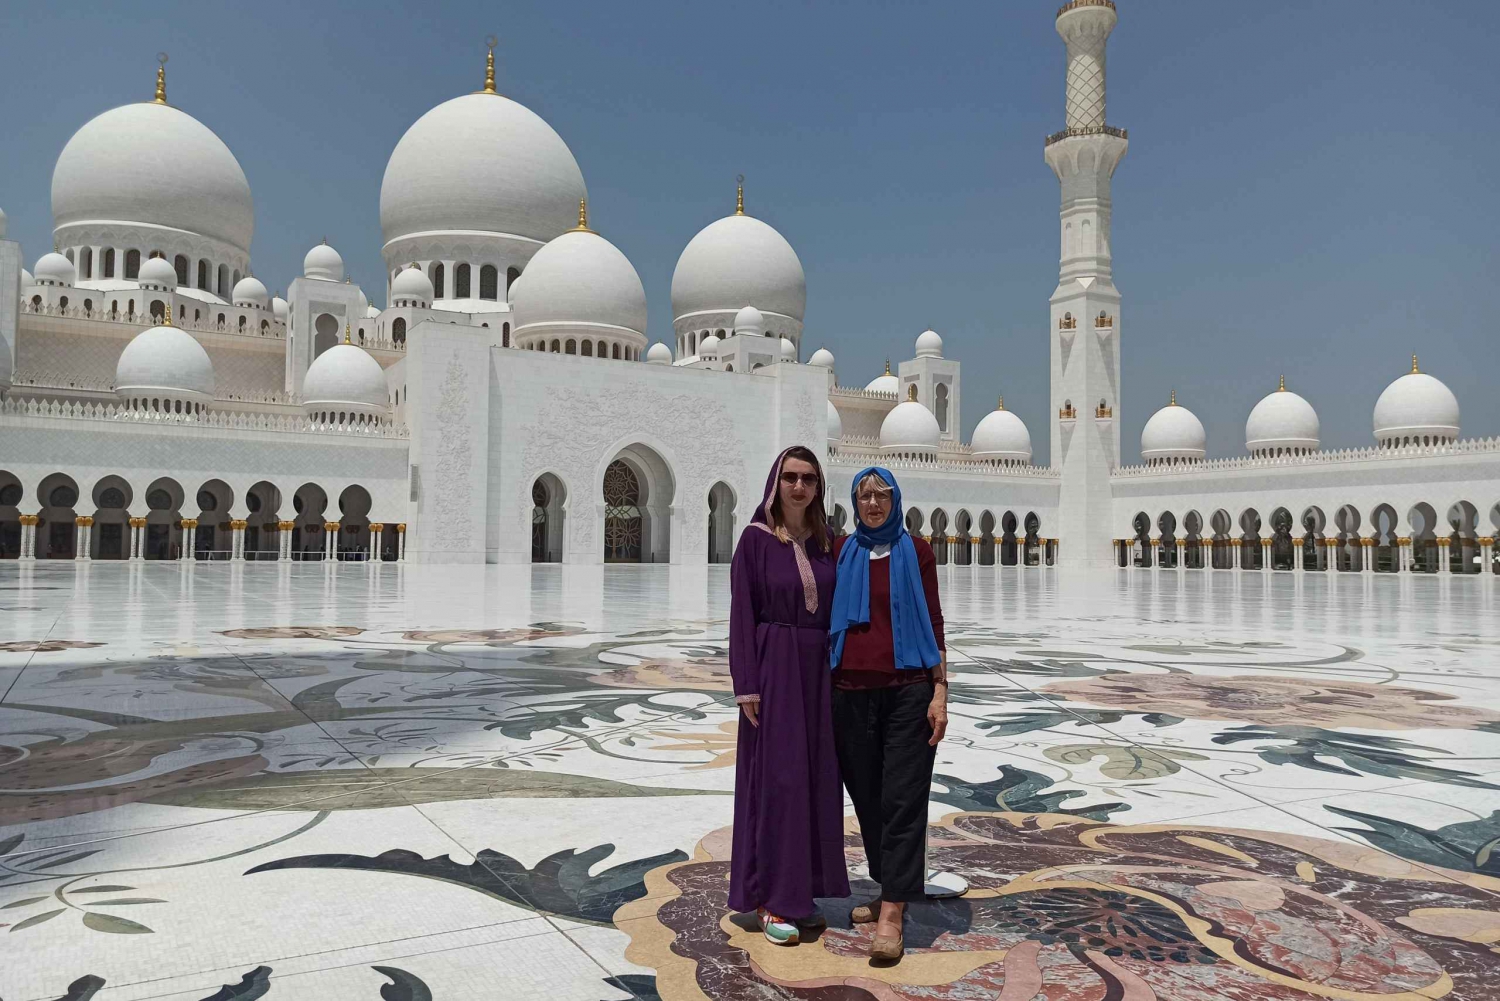 From Dubai: Abu Dhabi Full Day Adventure With Grand Mosque